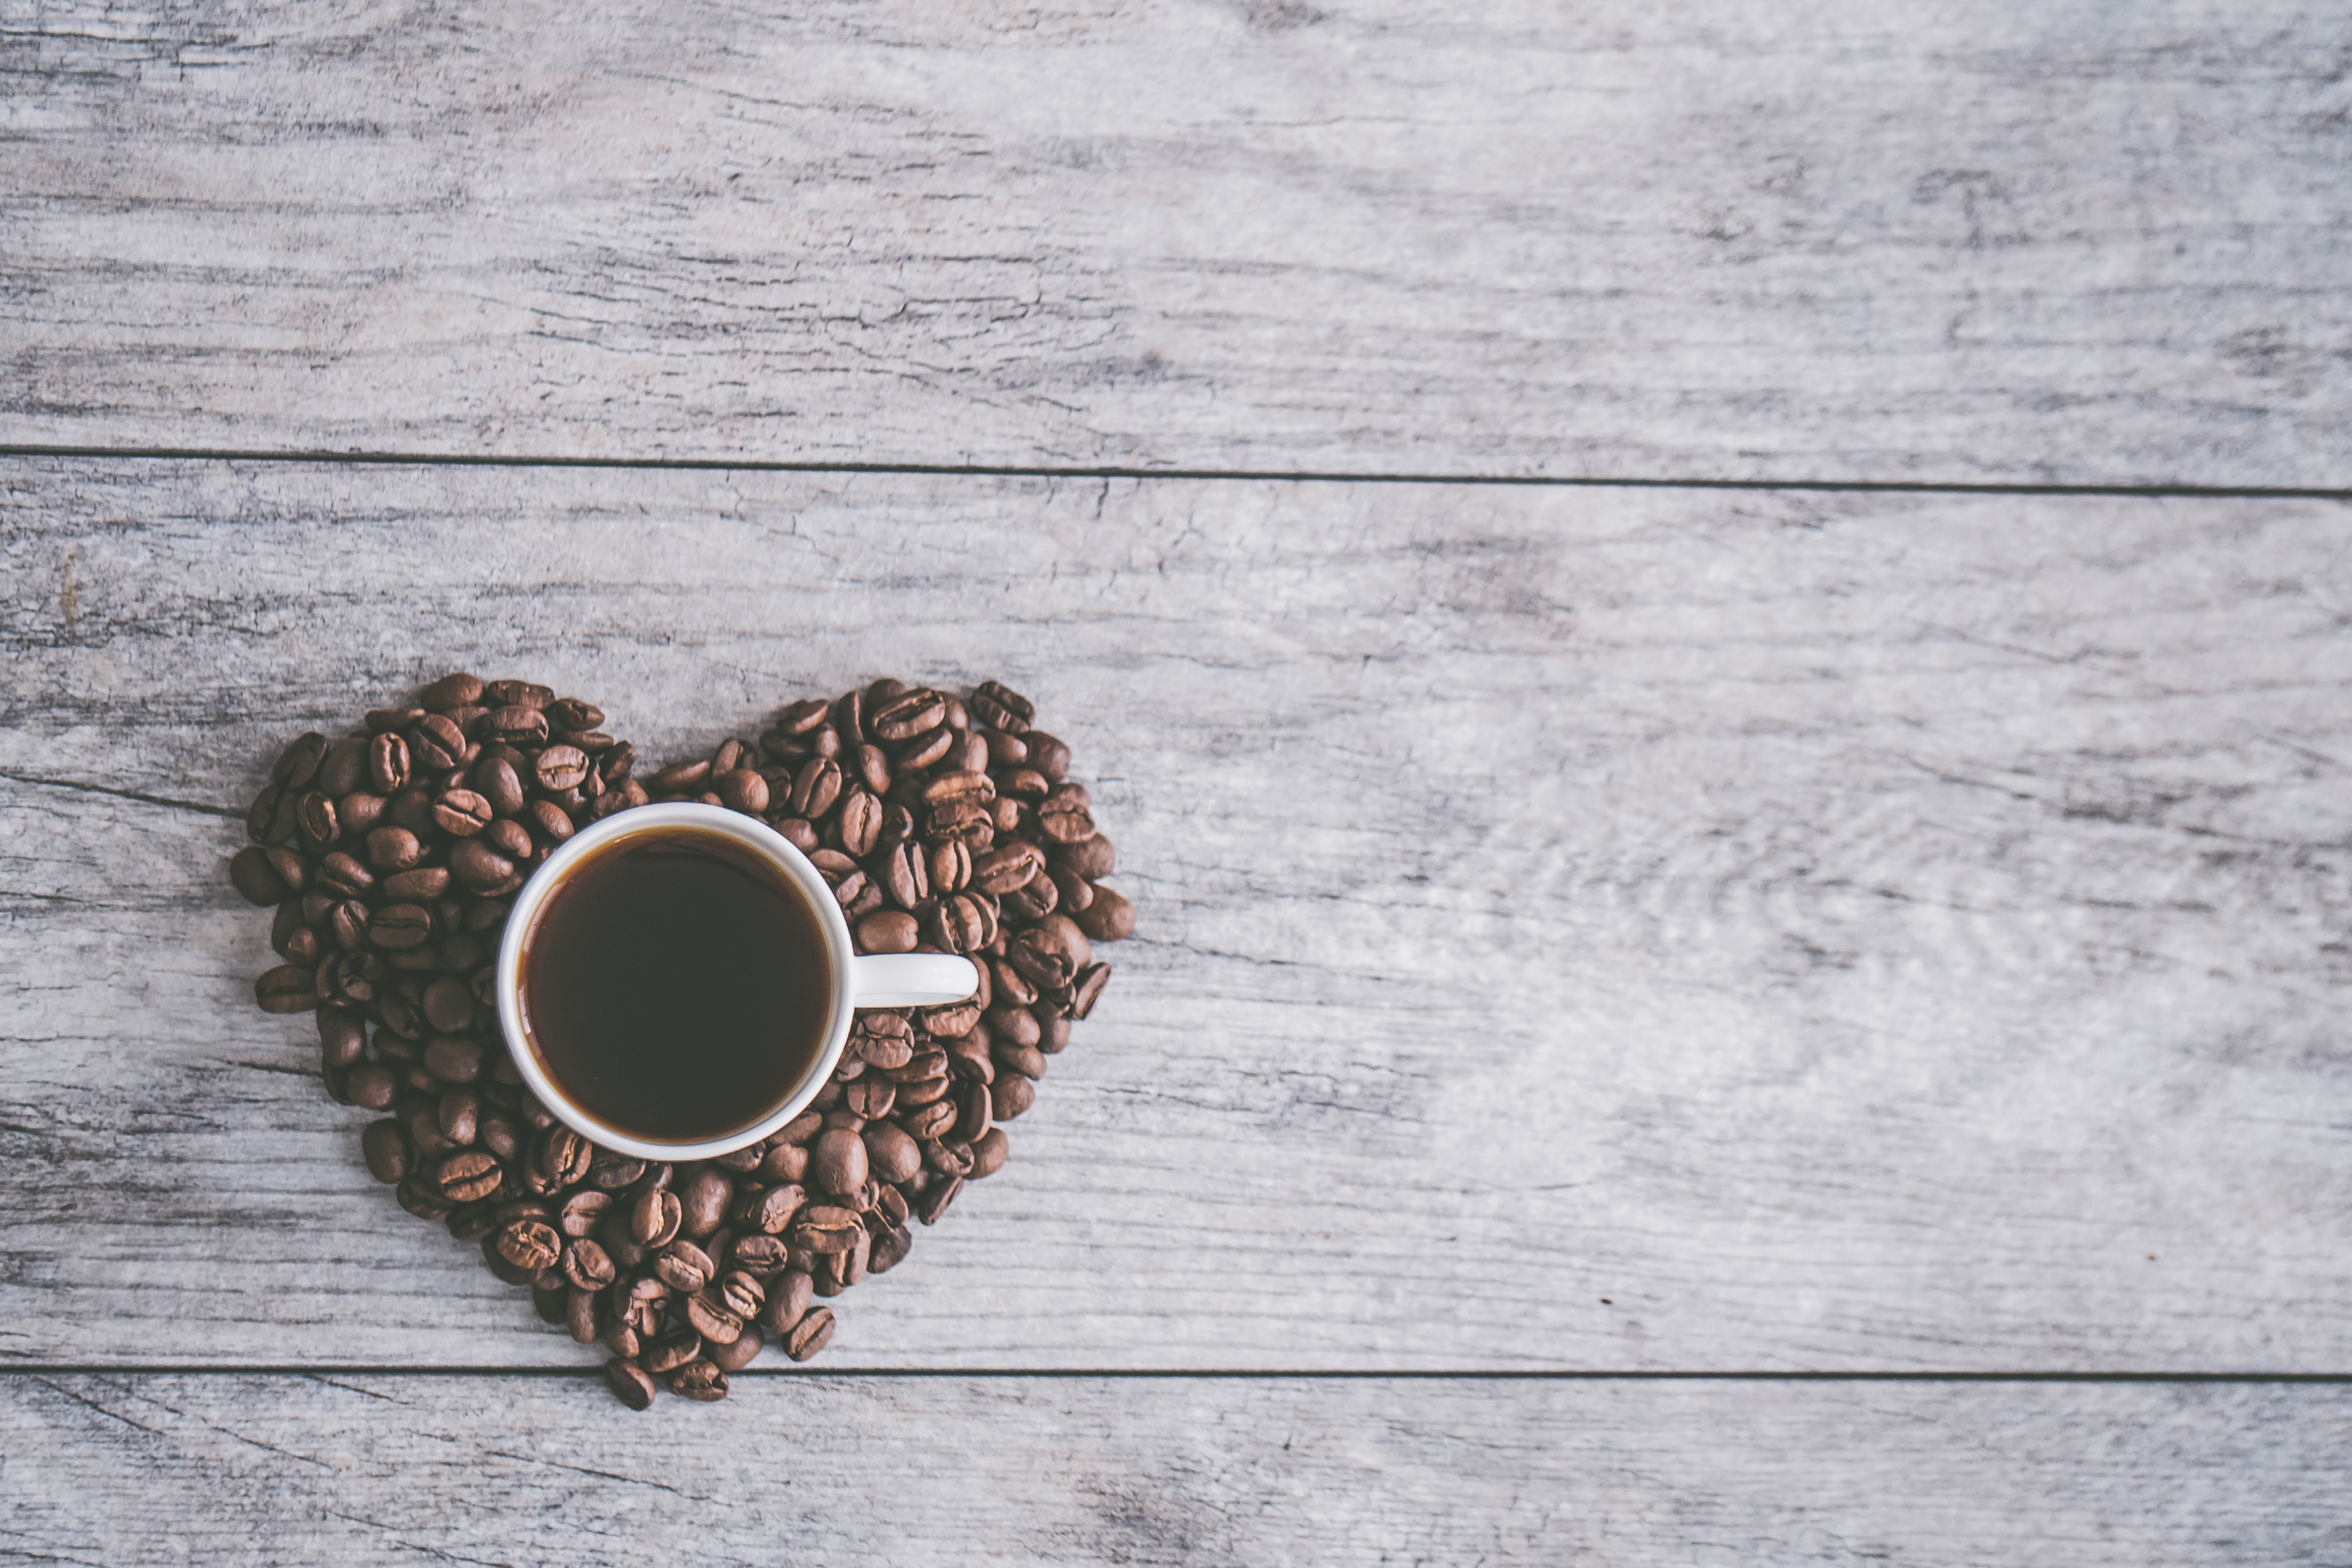 Switching to decaf coffee can help your anxiety